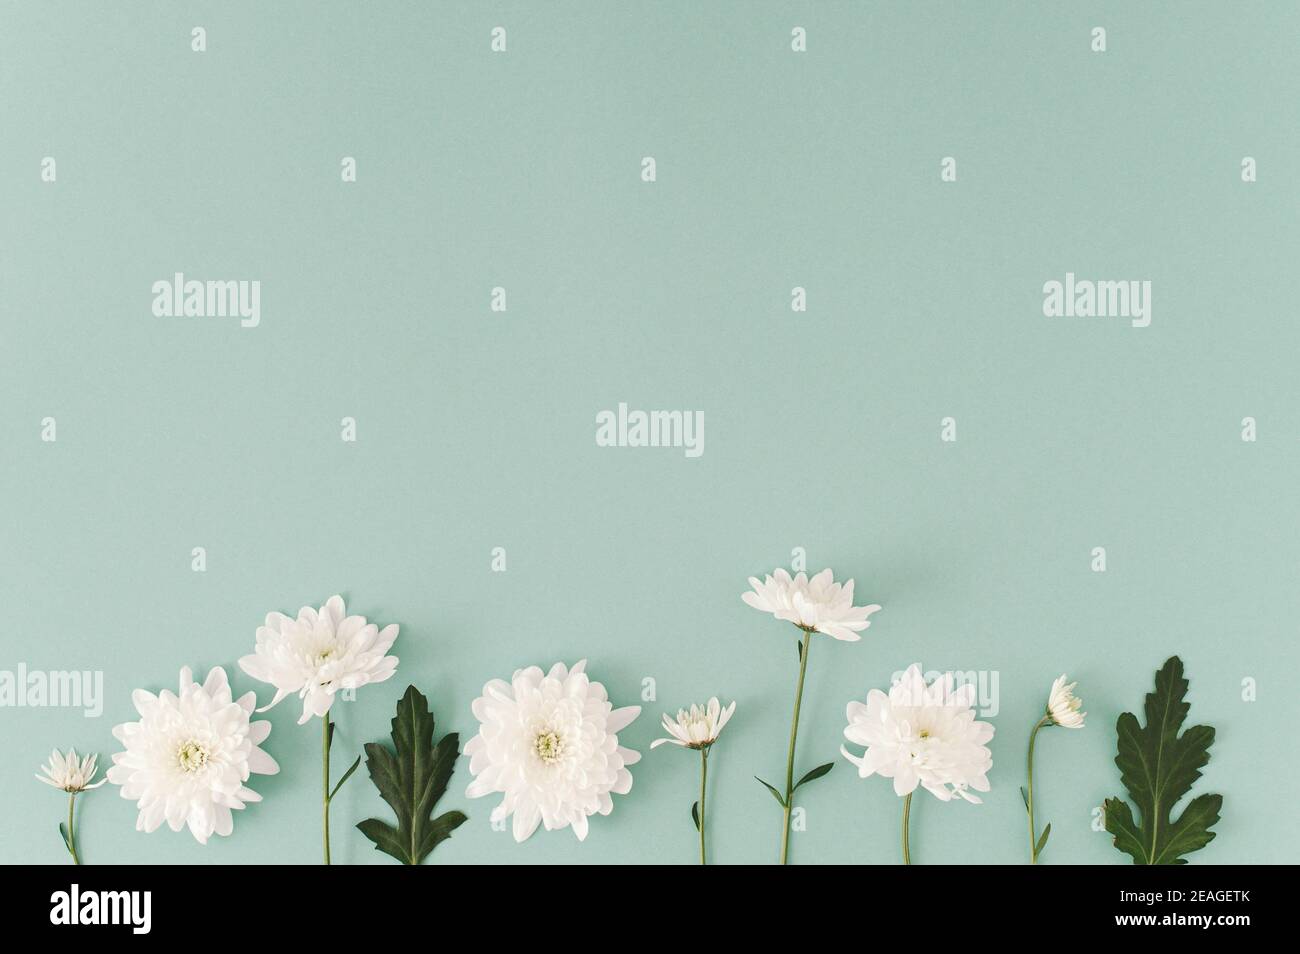 Creative  layout made with bright bloom white  flowers  on the soft blue background. Minimal nature  concept. Stock Photo